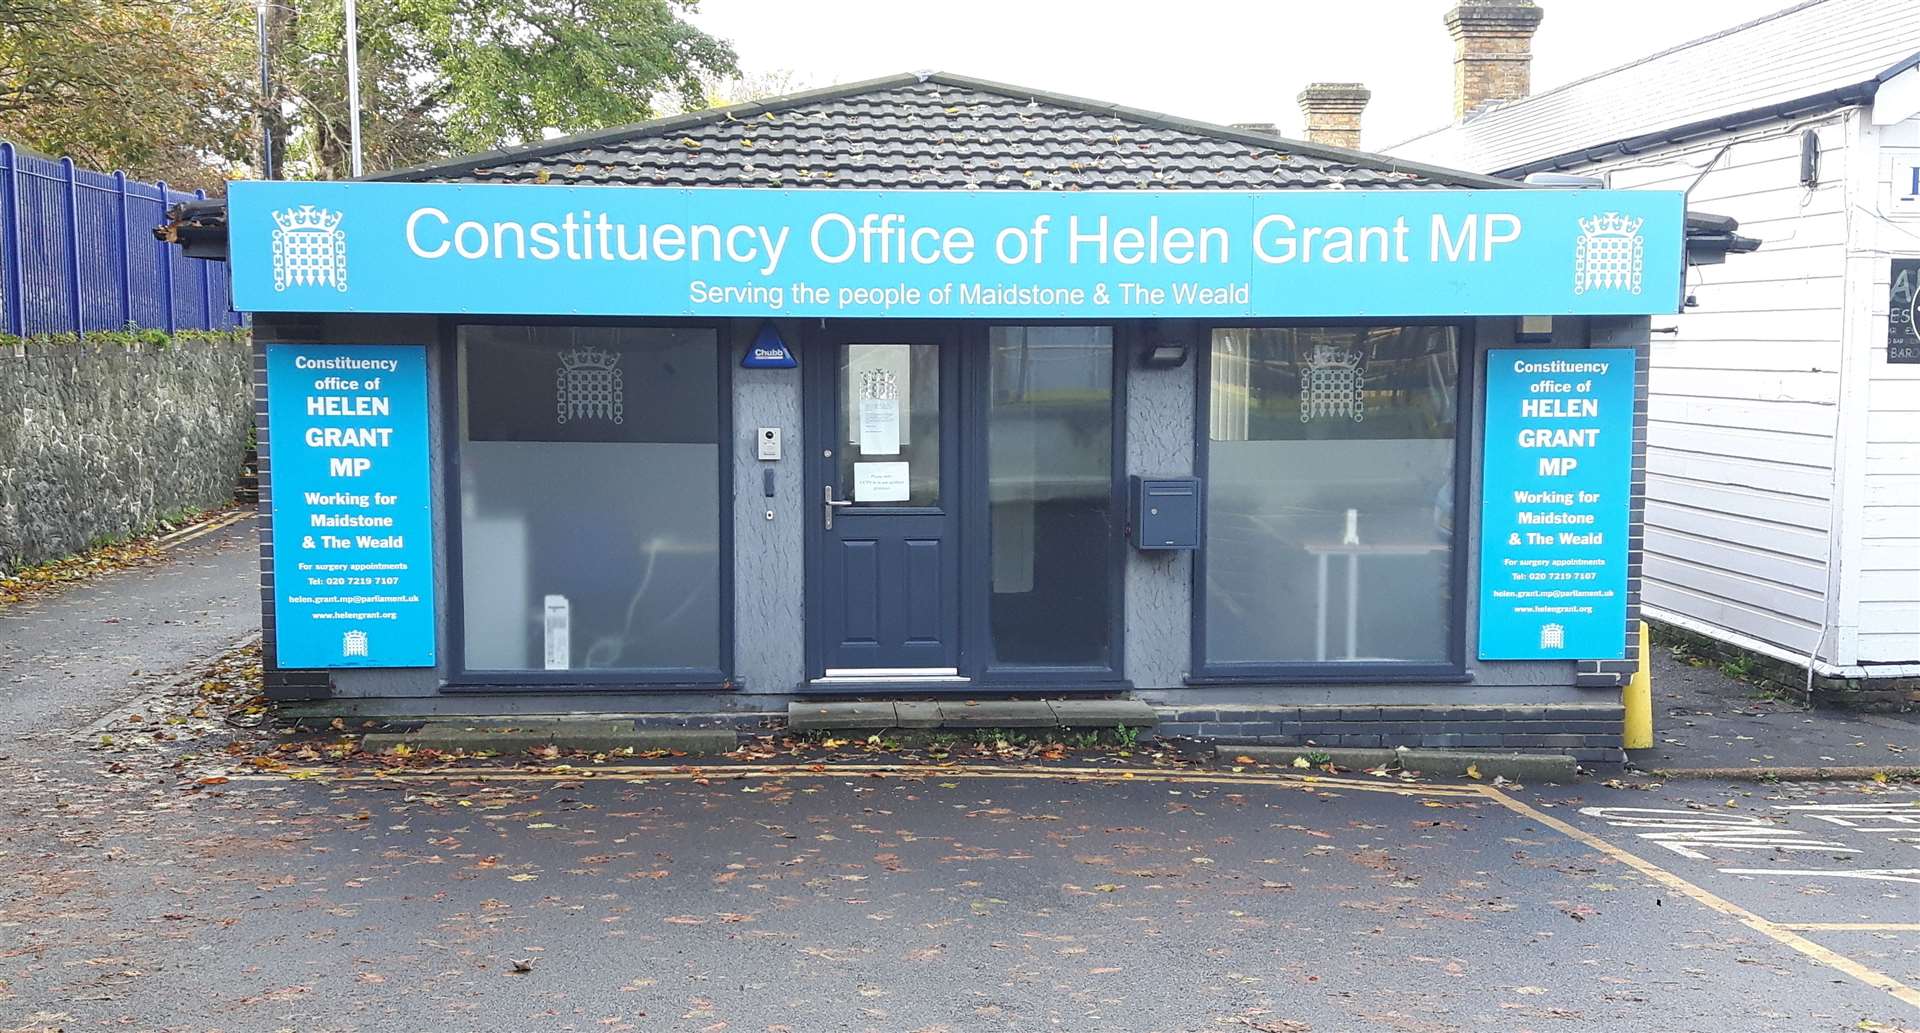 Helen Grant's current constituency office at Maidstone East station